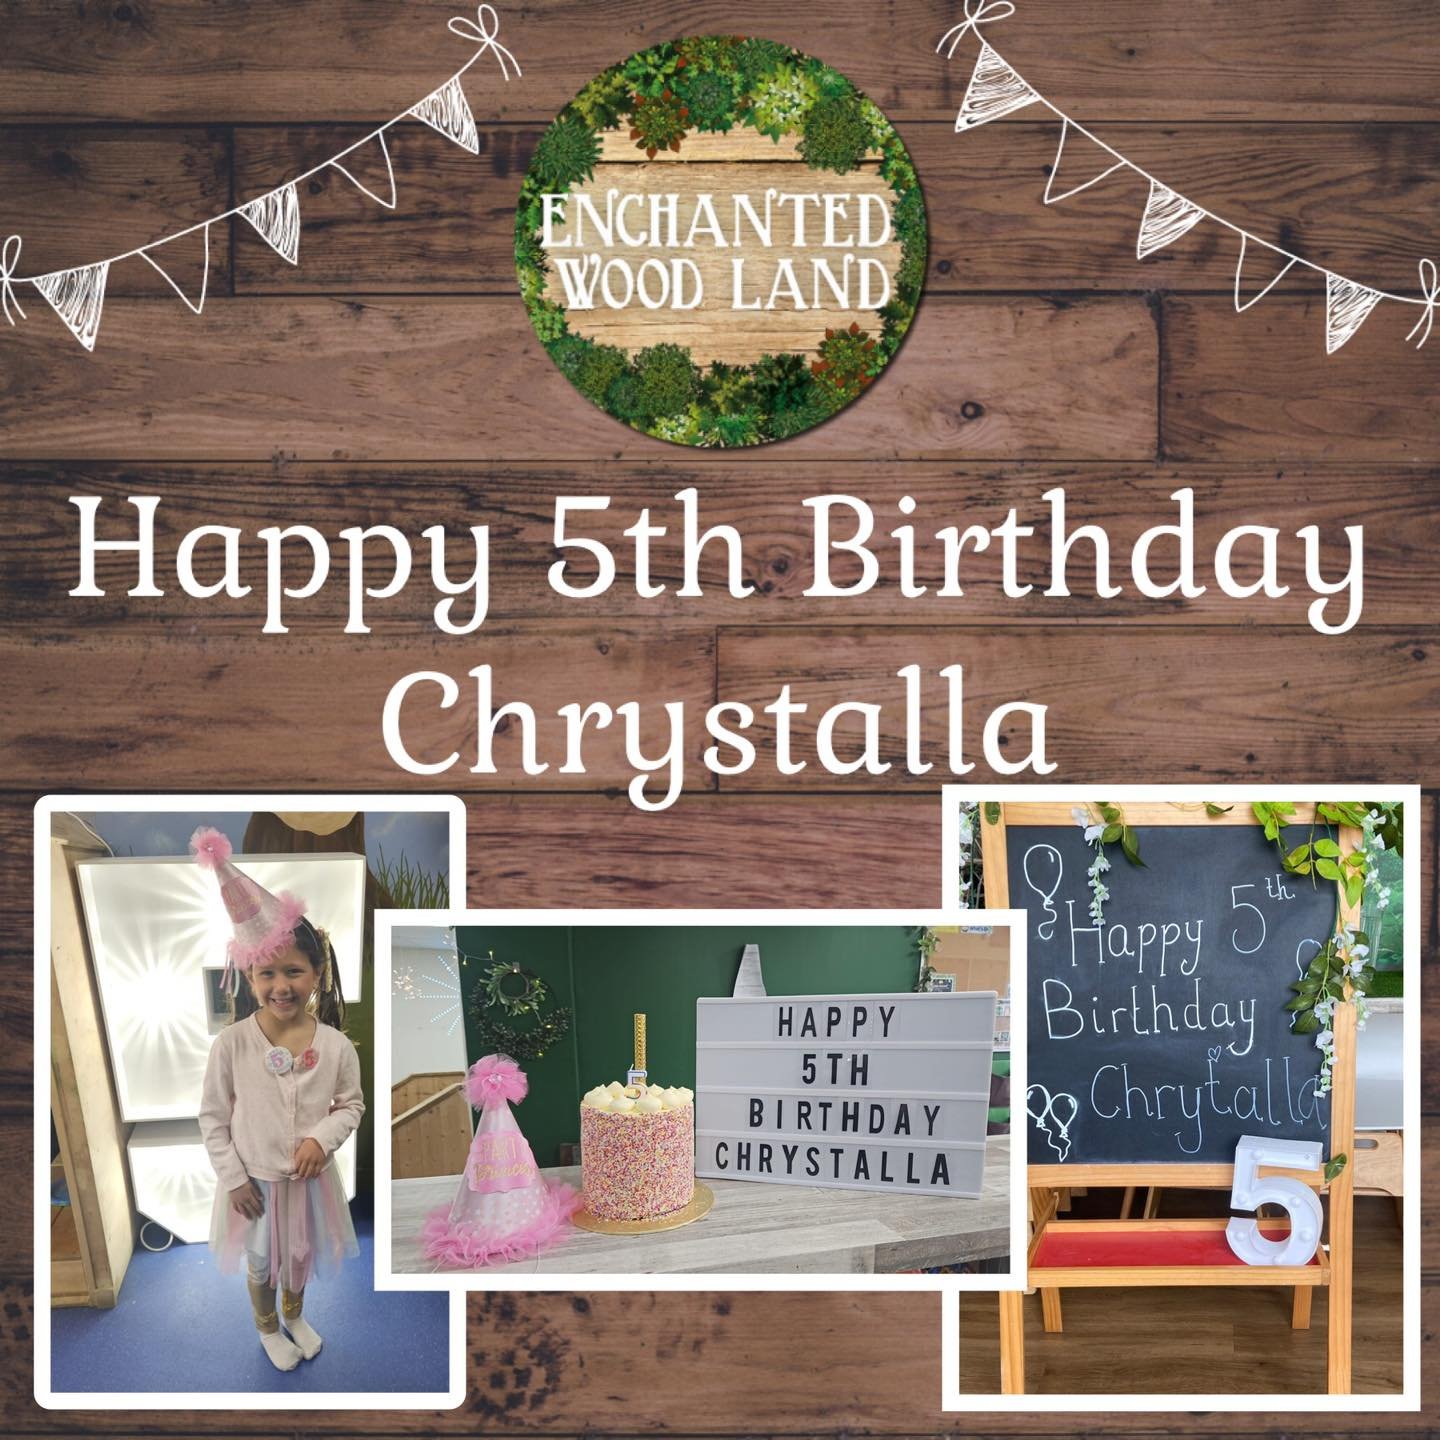 🌳💕Today we celebrated two amazing birthday parties @EnchantedWoodLand! We would like to say a big&hellip; 

💫 &lsquo;Happy 5th Birthday Chrystalla&rsquo;

💫 &lsquo;Happy 4th Birthday Robyn &amp; Albert&rsquo;

We hope you all had an amazing party